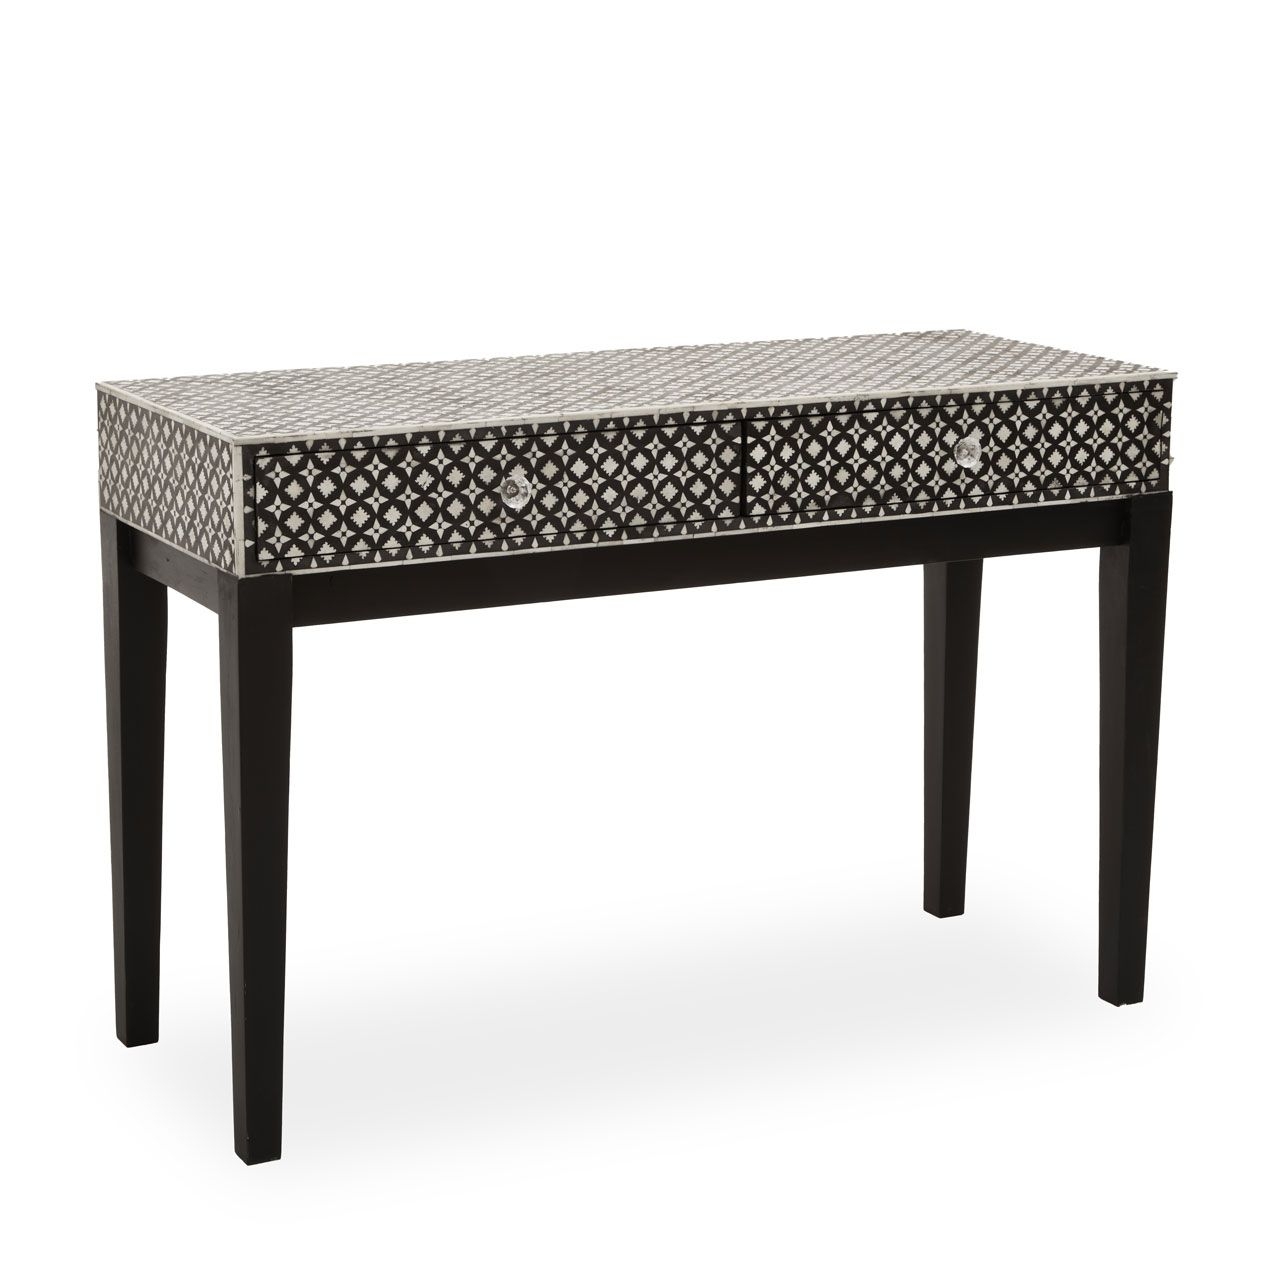 Boho Wooden Console Table In Black Exotic Patteren With 2 Drawers